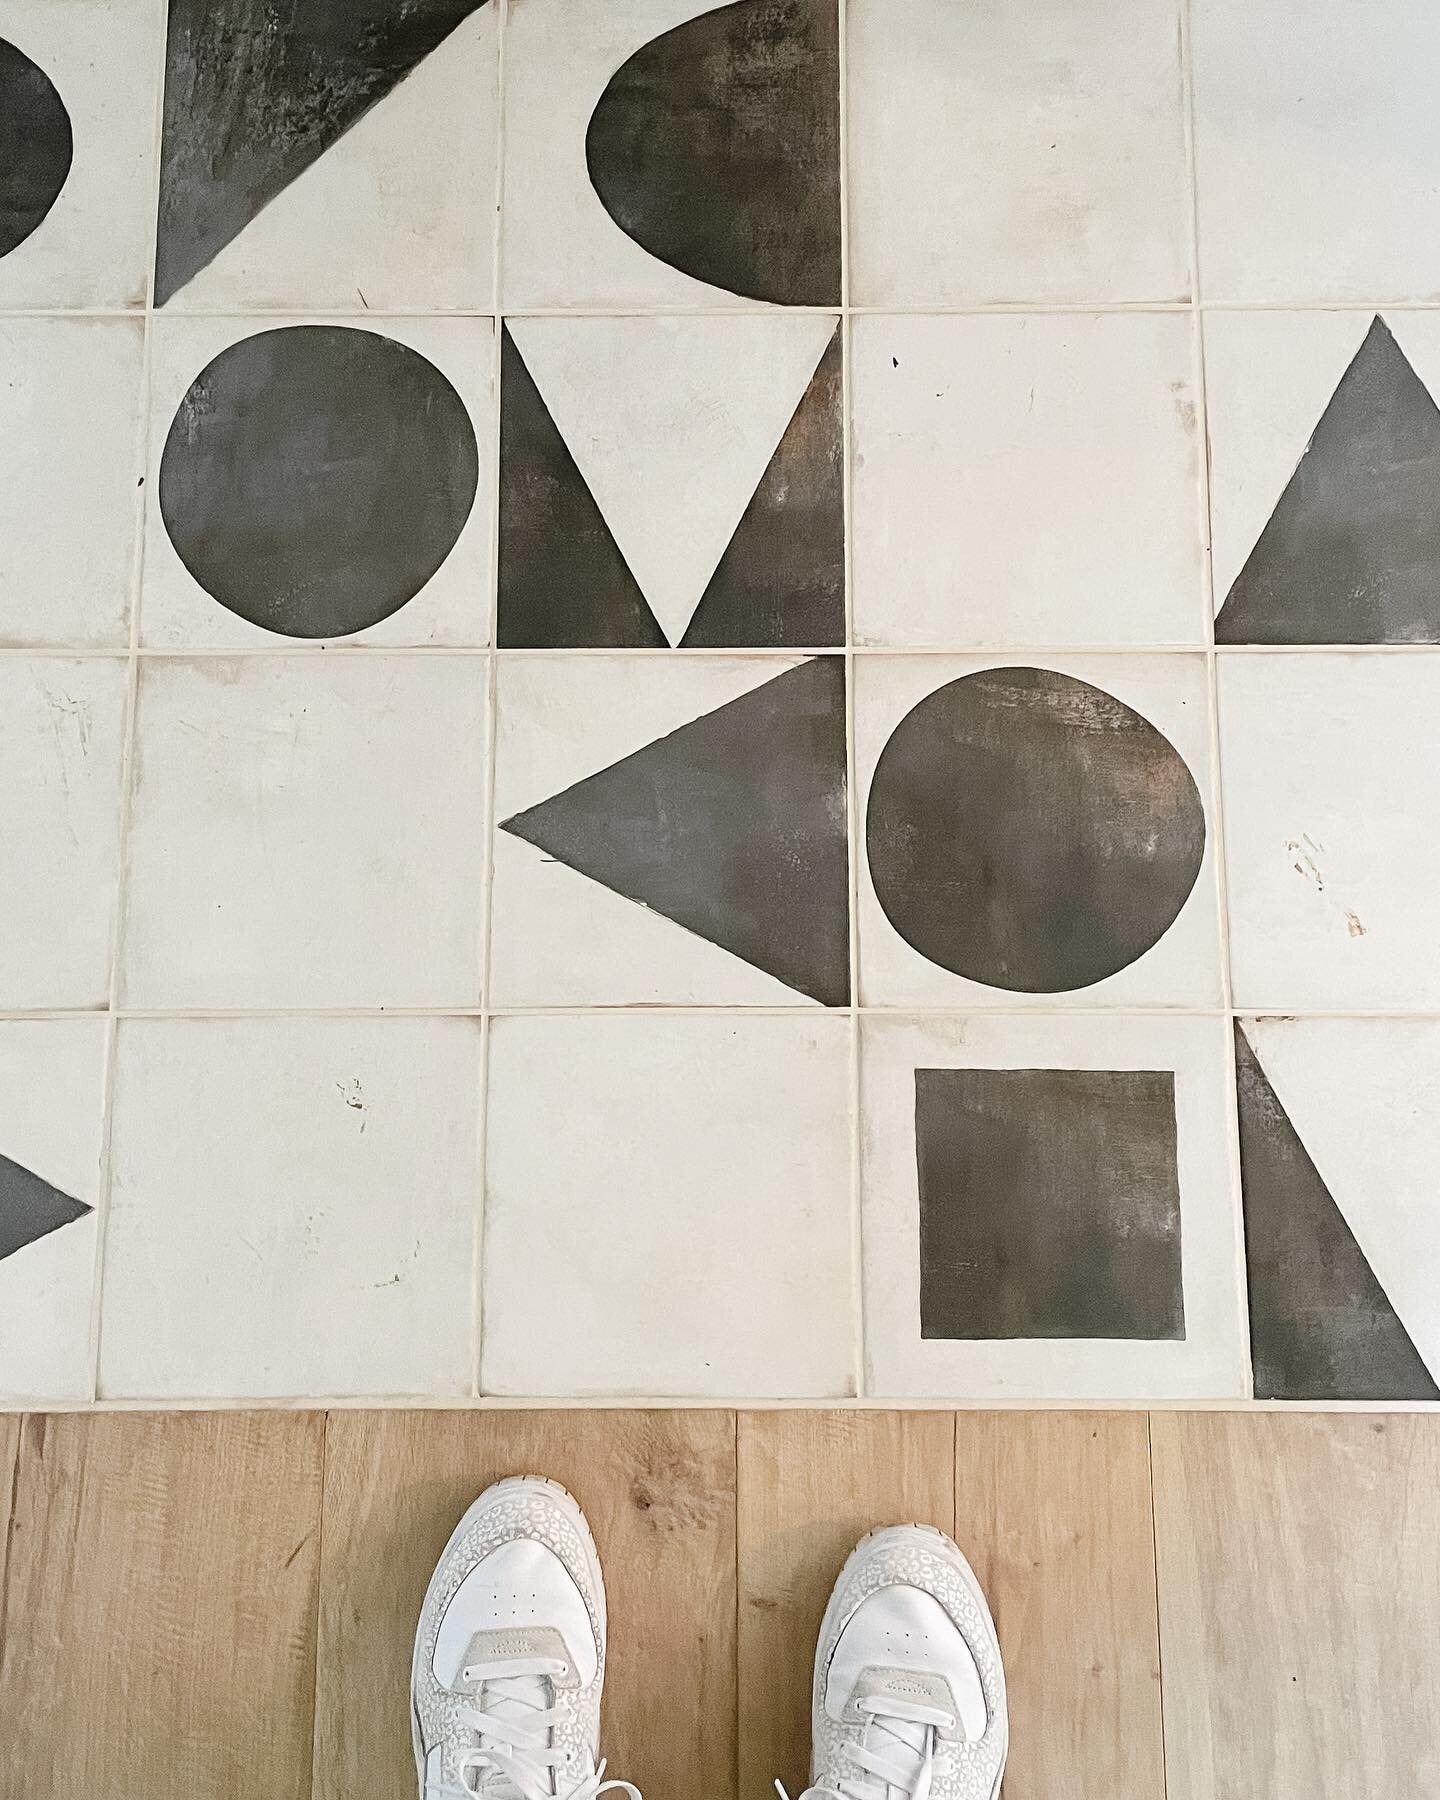 These tiles deserved a post on the grid 😍 We used them to create a tiled doormat for one of my recent reno projects. 

I loved this detail for 2 reasons - 1) it's practical and more hardwearing than the engineered wood that surrounds them, so perfec